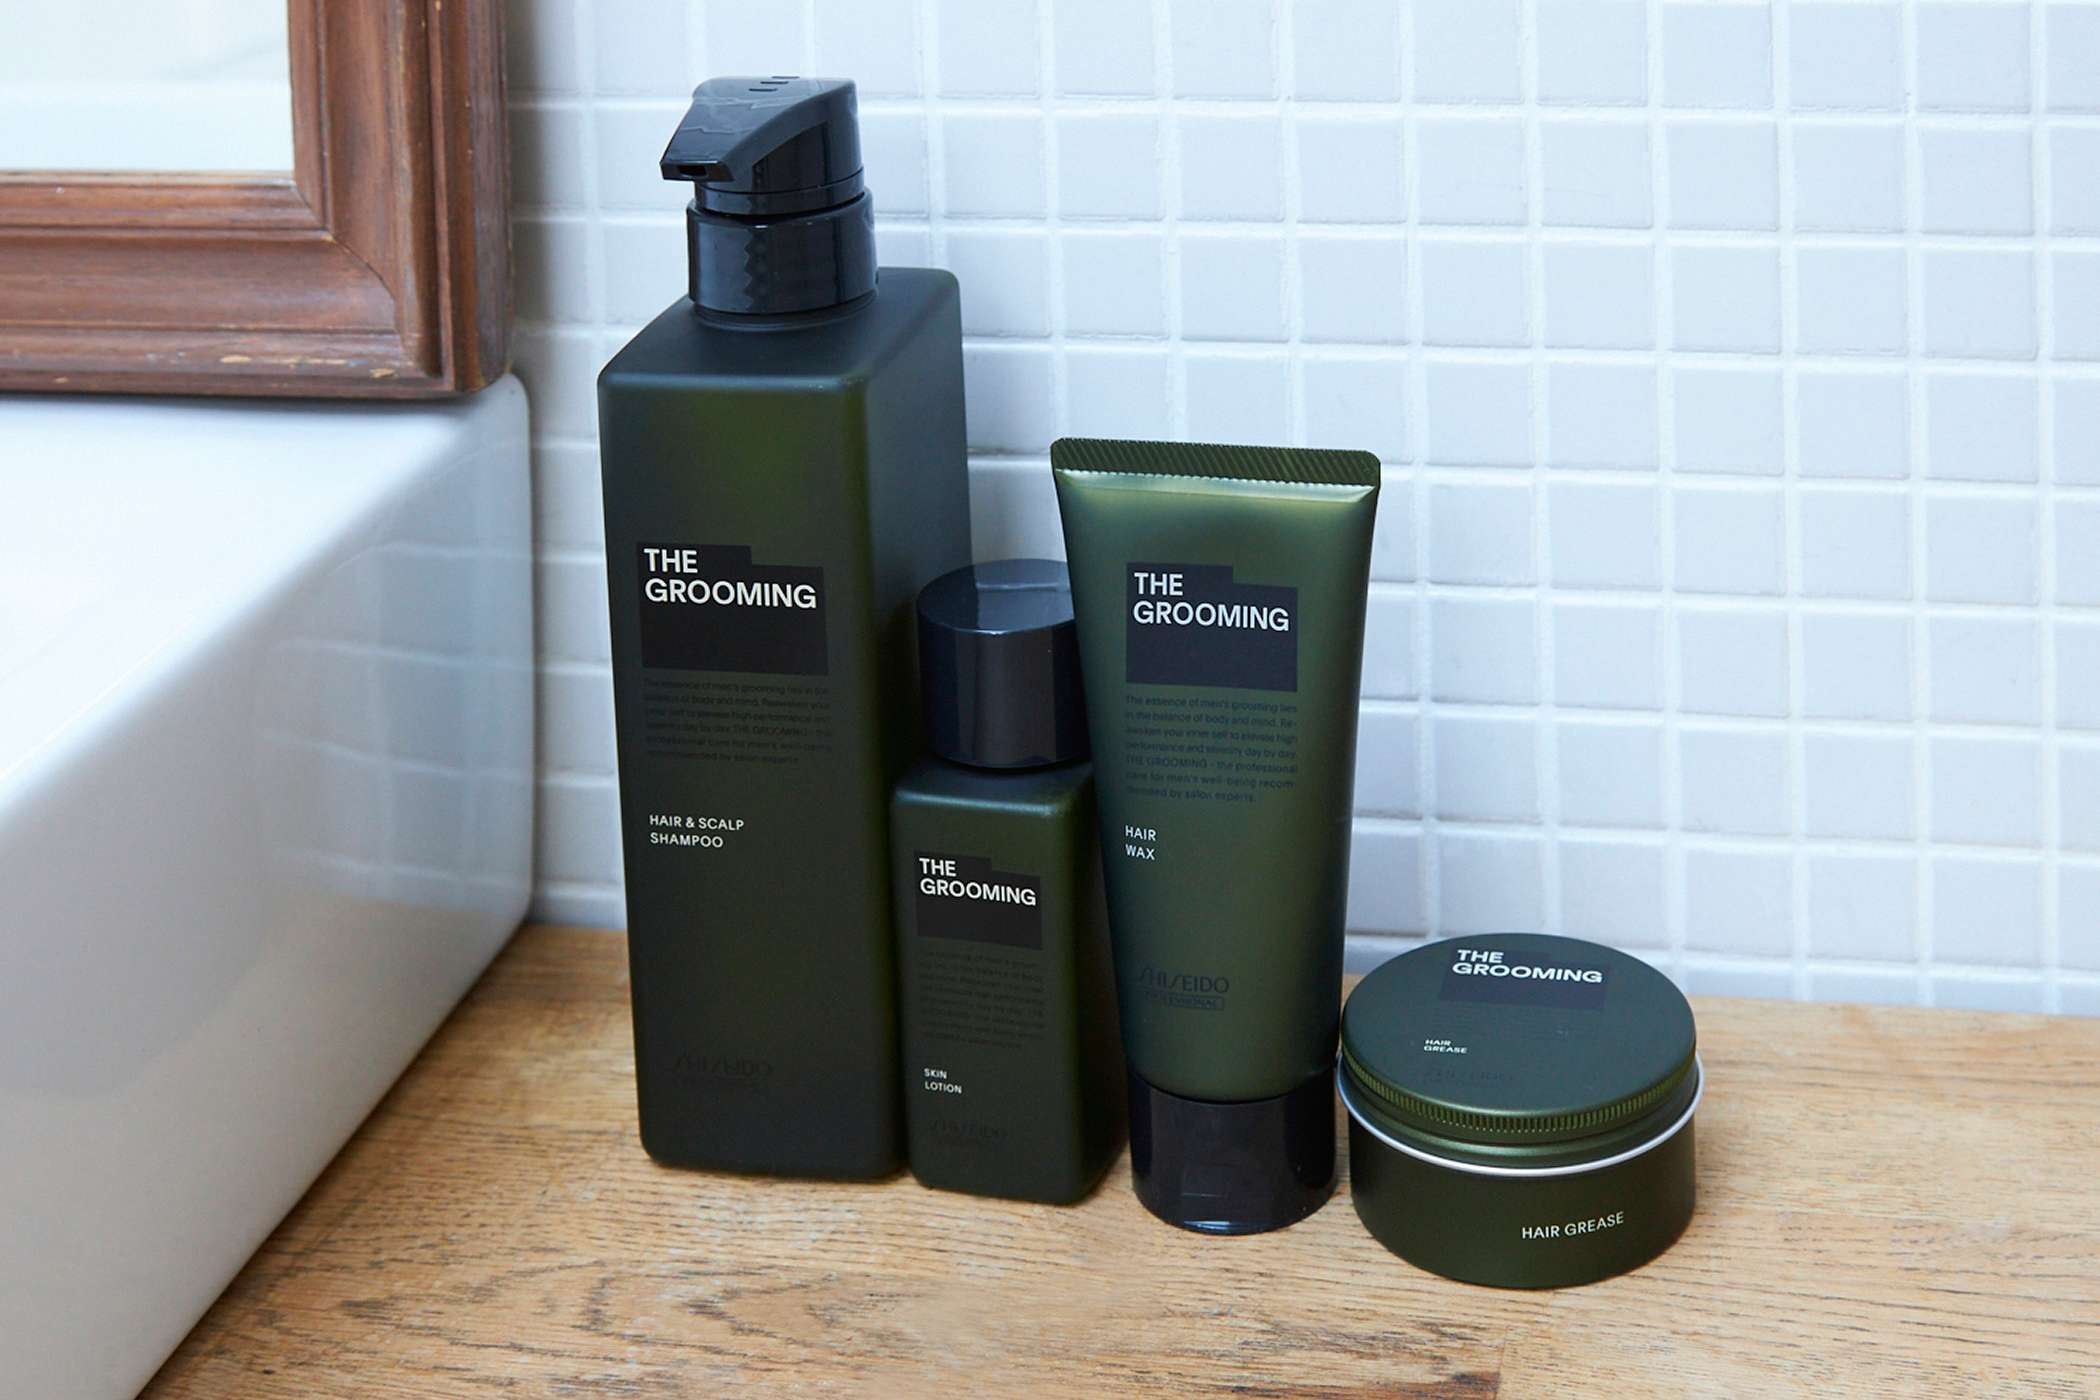 The best first impression a man can make is one of cleanliness. Hack your first impression with THE GROOMING